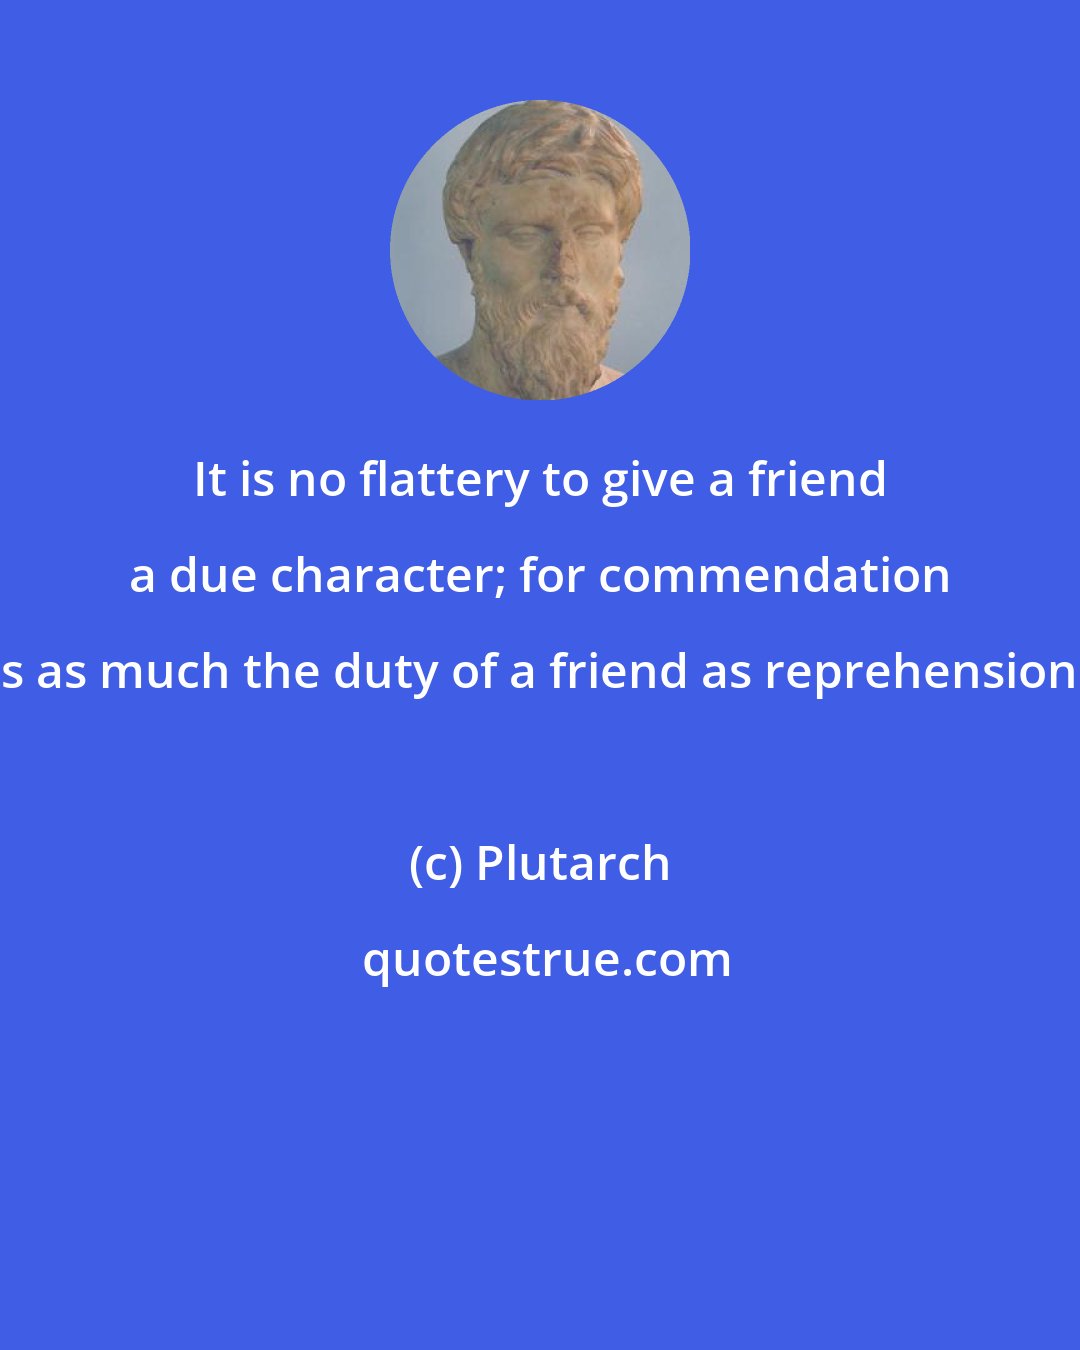 Plutarch: It is no flattery to give a friend a due character; for commendation is as much the duty of a friend as reprehension.